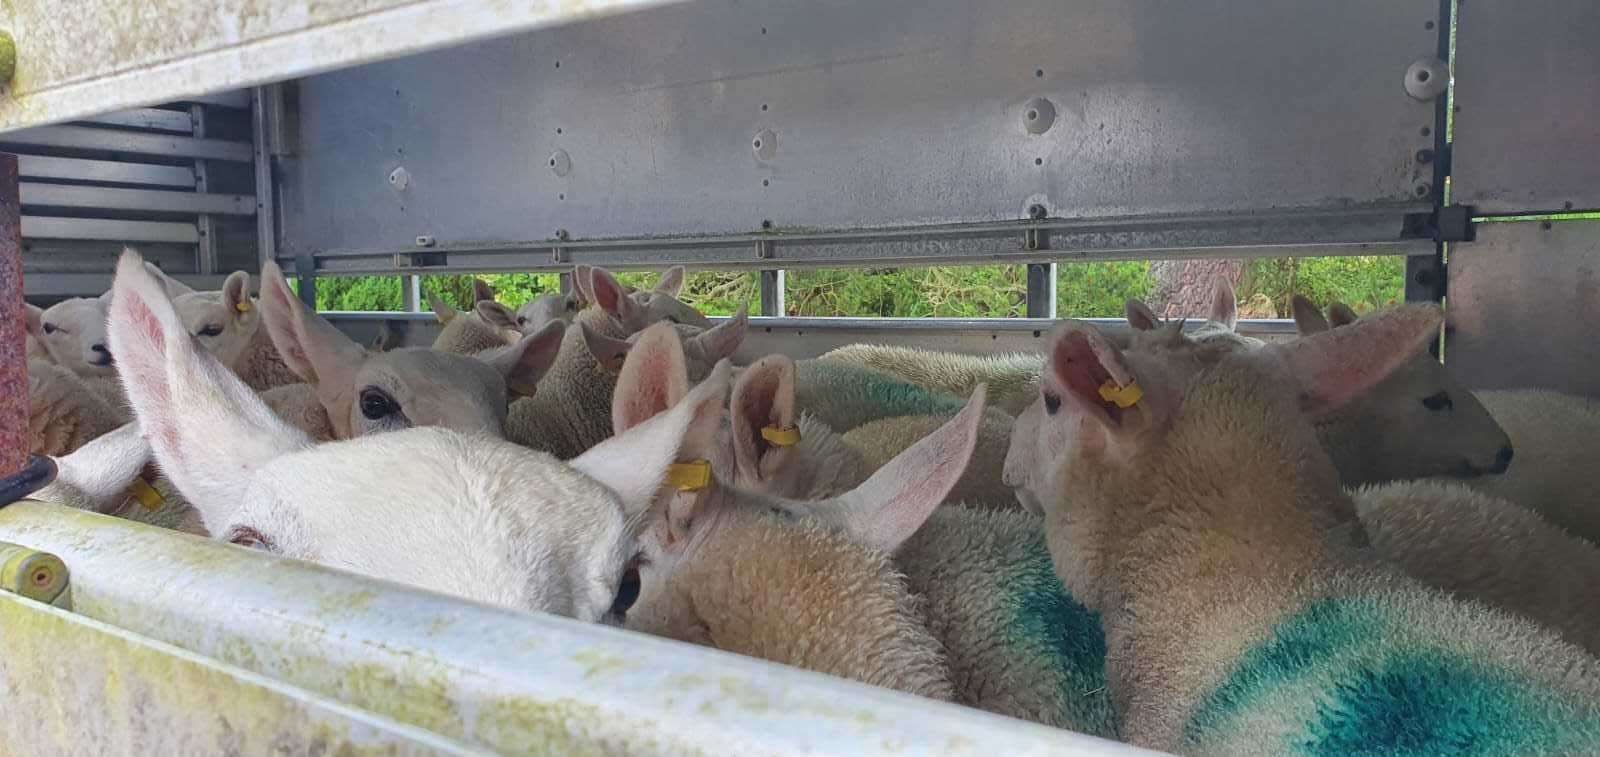 Some of Russell Smith's lambs on their way to market.